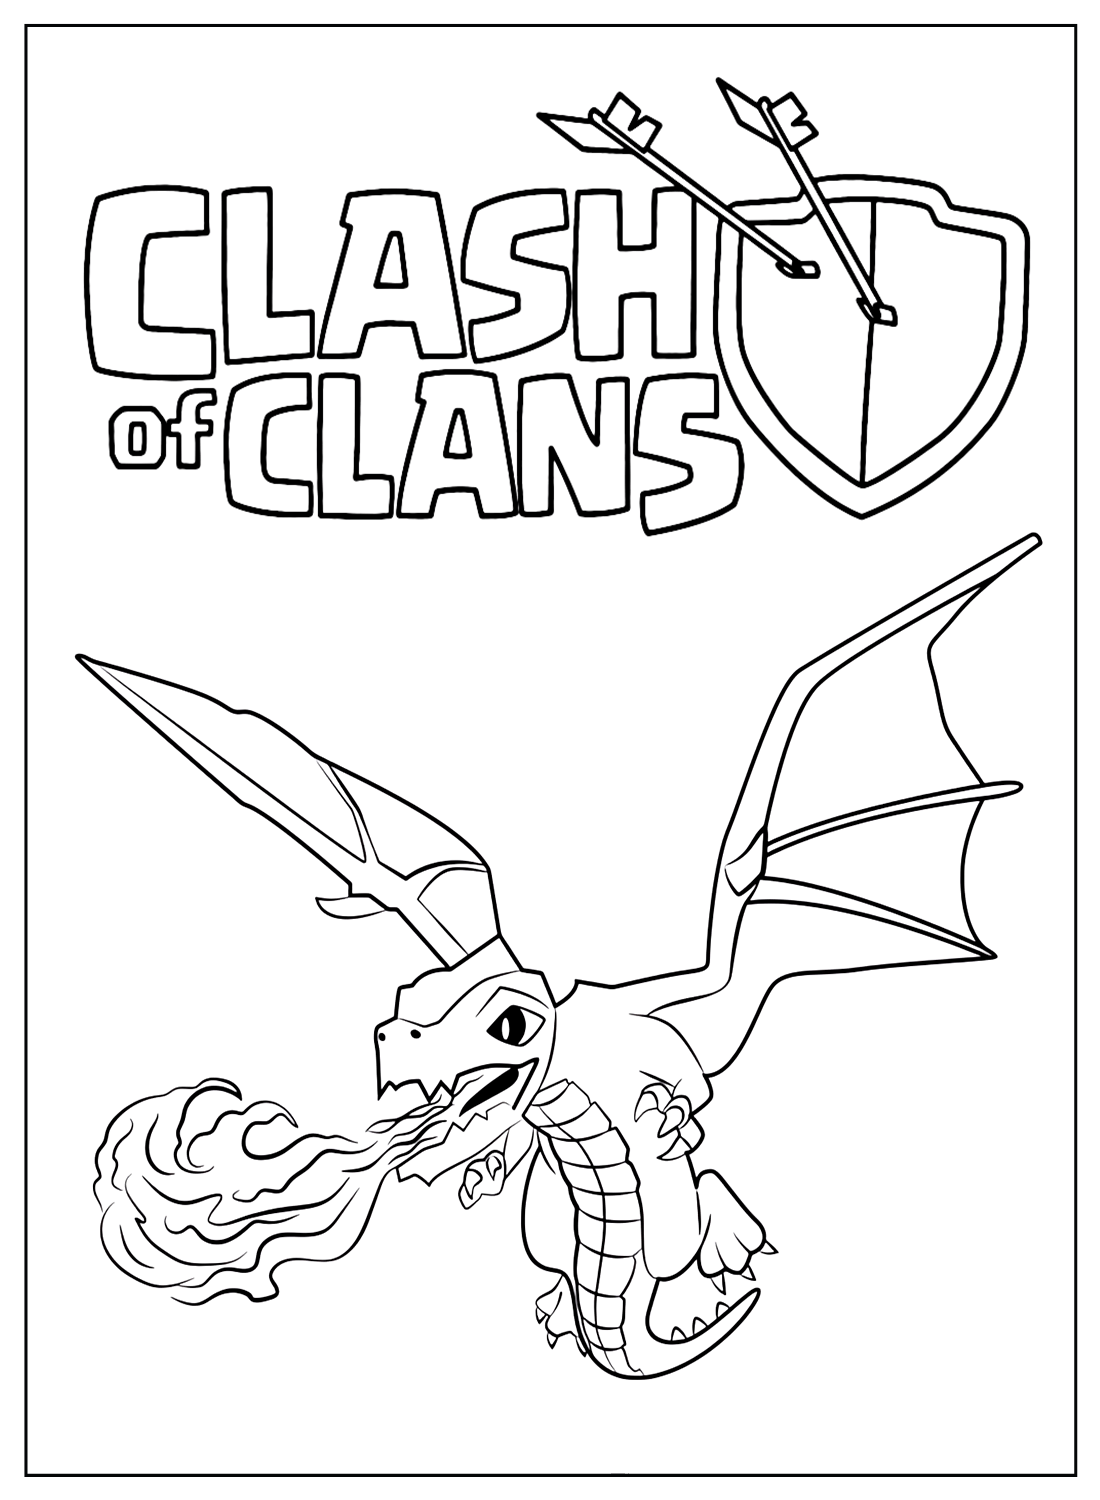 Dragon Clash of Clans Coloring Pages from Clash of Clans